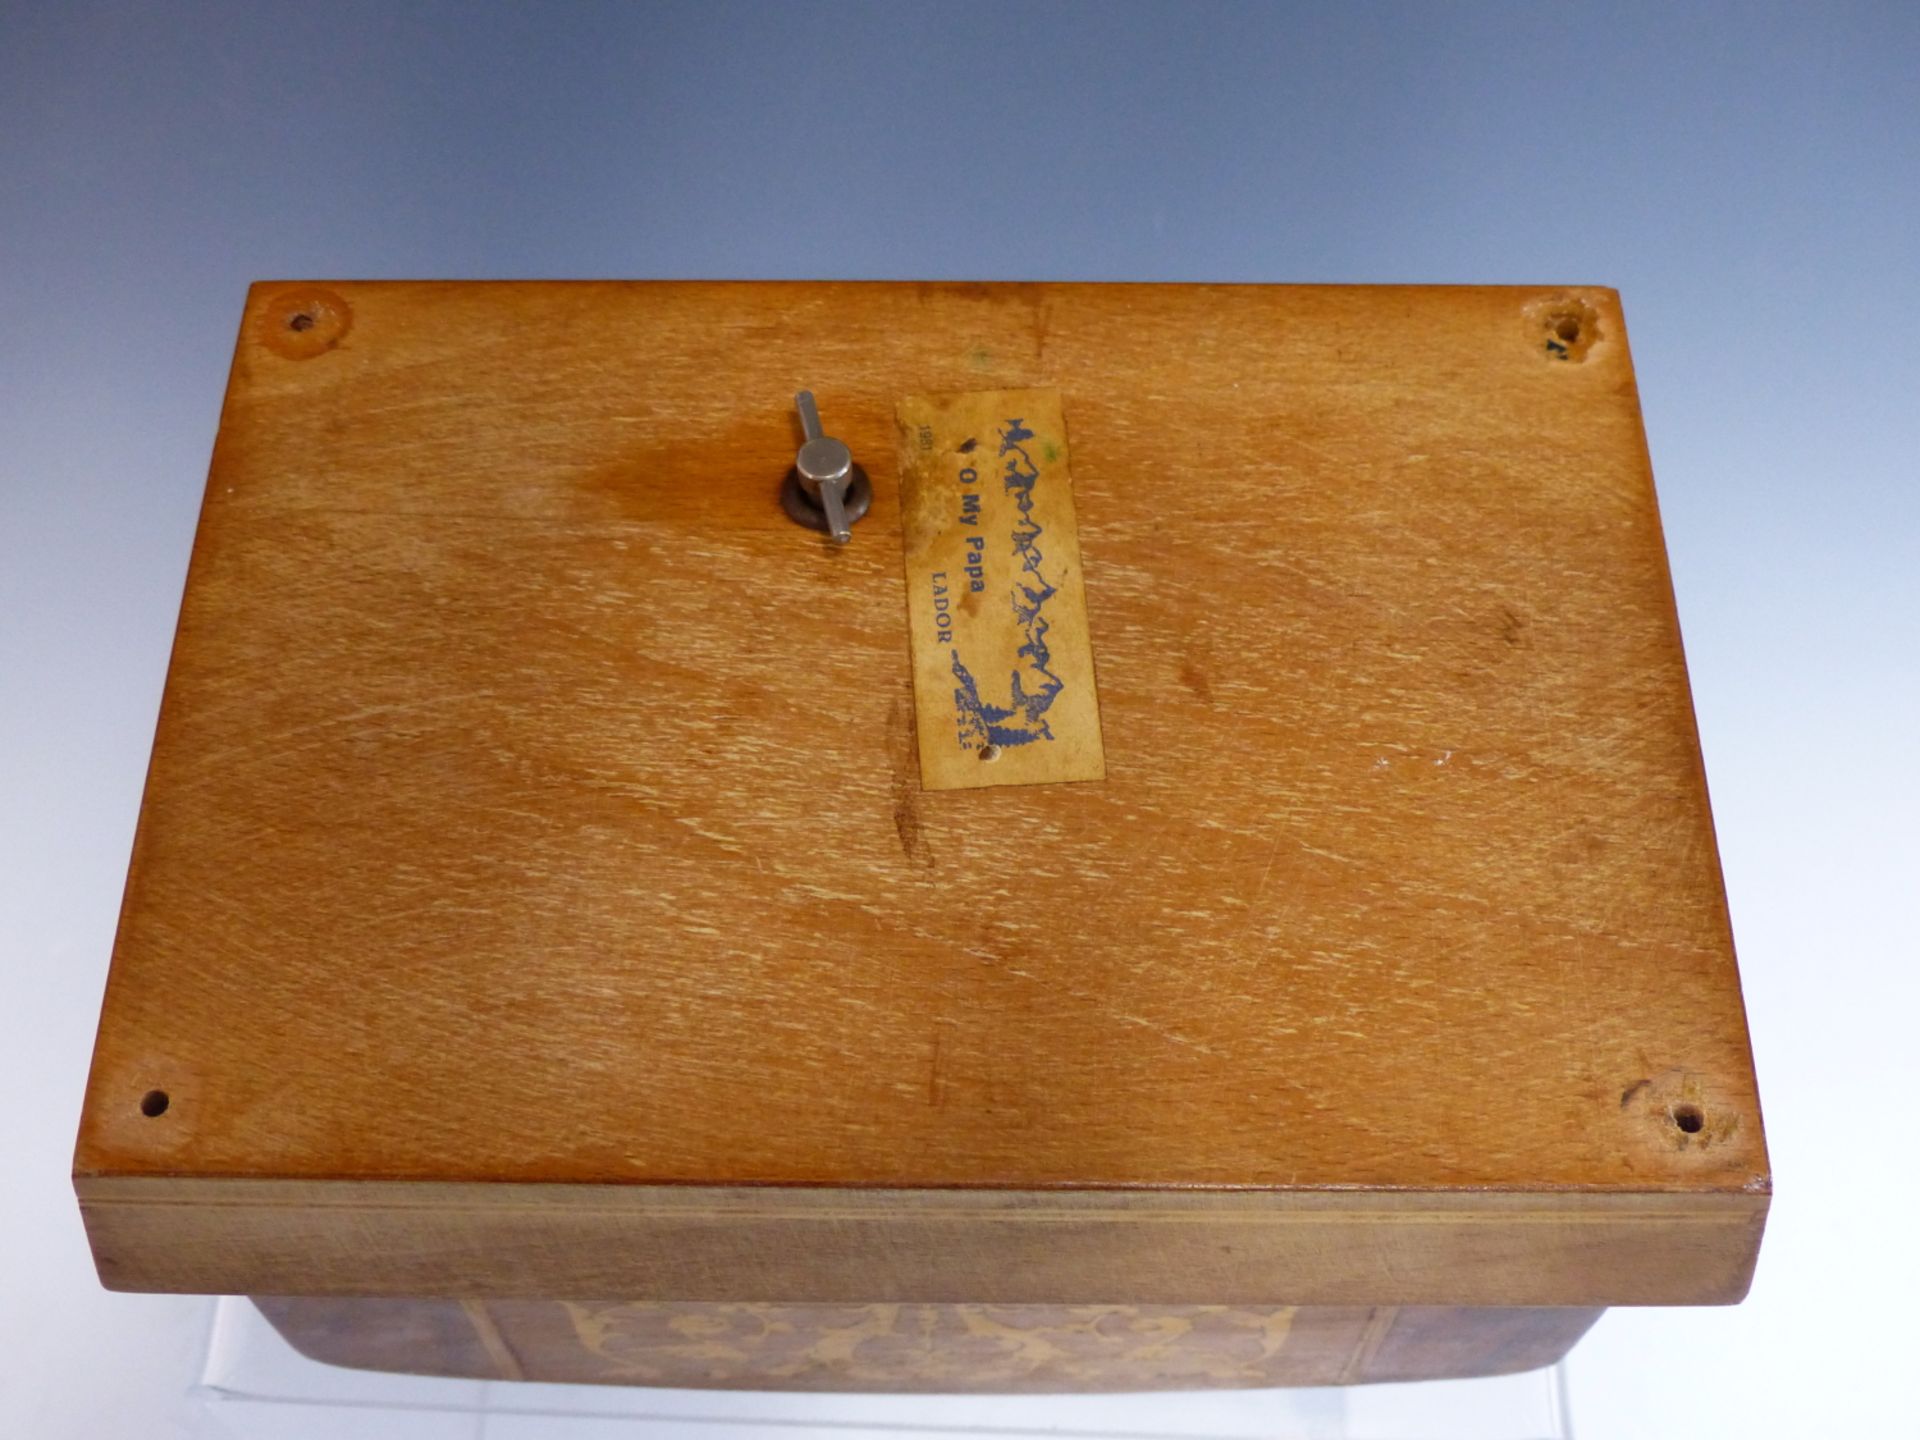 A SORRENTO INLAID WALNUT CIGARETTE DISPENSER BOX WITH MUSICAL MOVEMENT AND BALLERINA. - Image 4 of 4